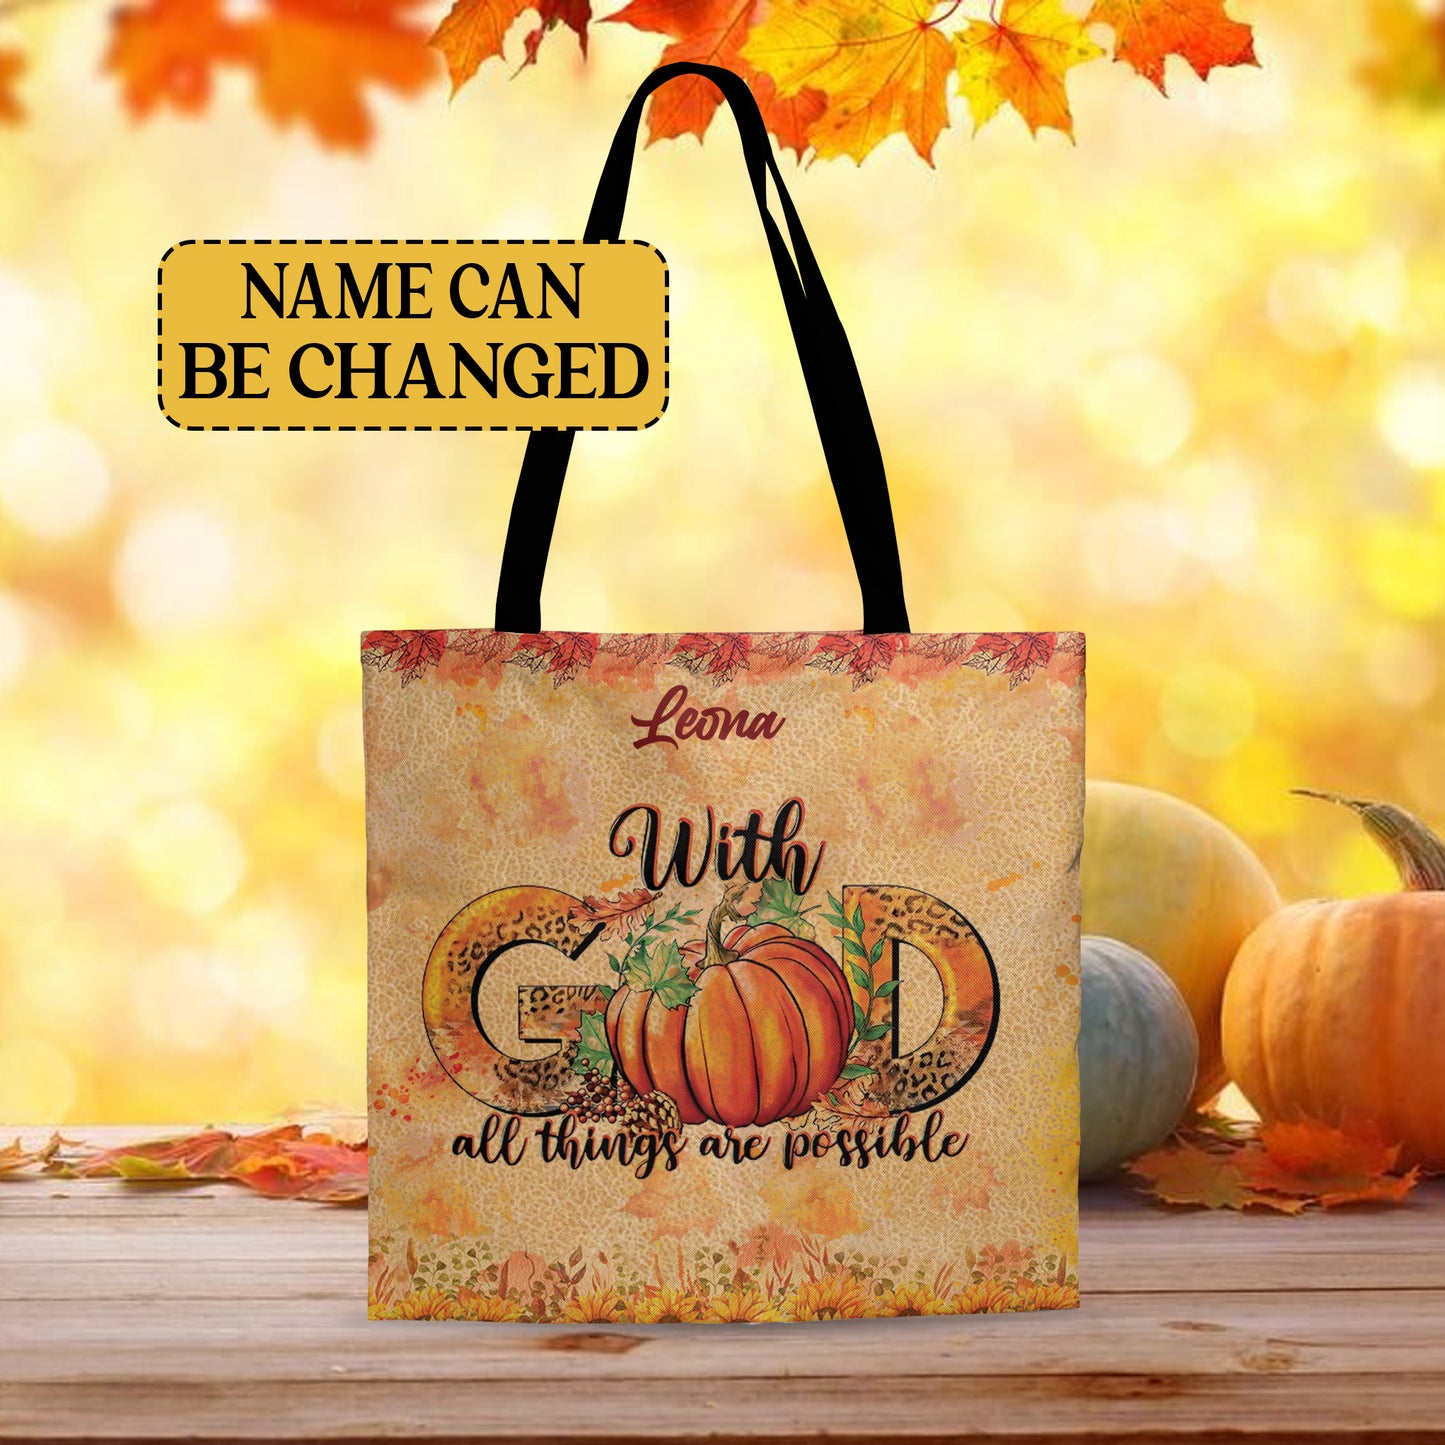 Christianartbag TOTE Bag, Fall Collection TOTE Bag - Durable Polyester Canvas with Stylish Designs, Personalized TOTE Bag, CAB02031023. - Christian Art Bag